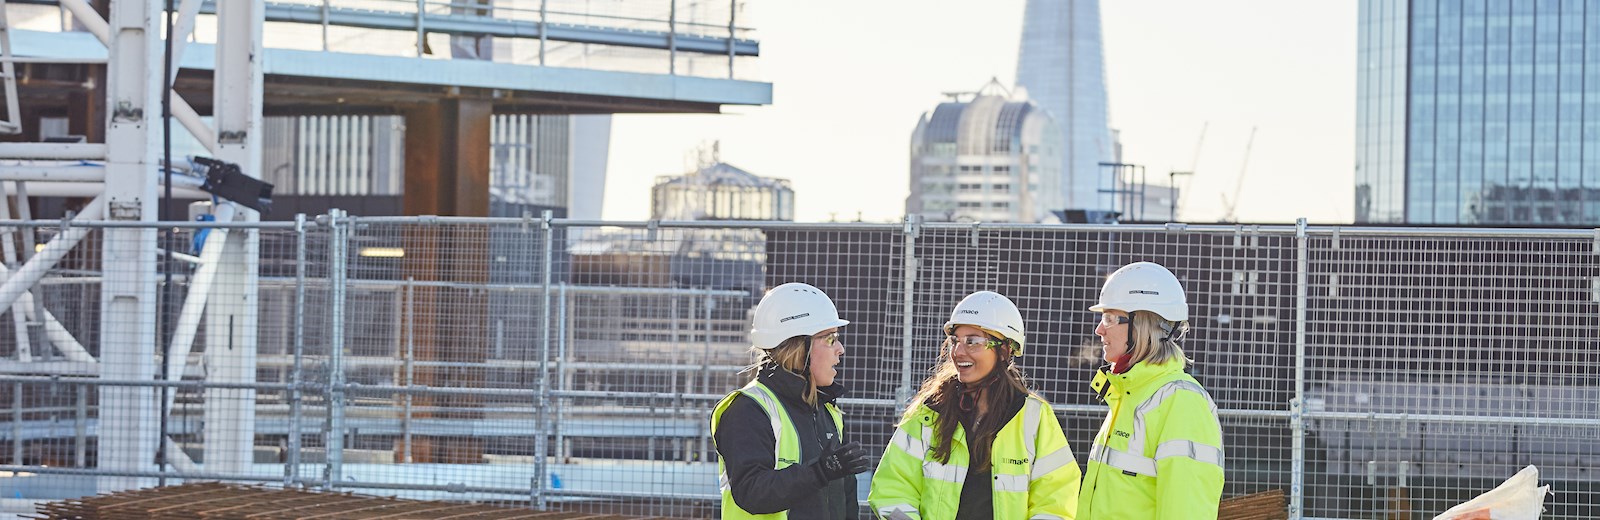 Three Females on a Construction Site in London - Mace Group